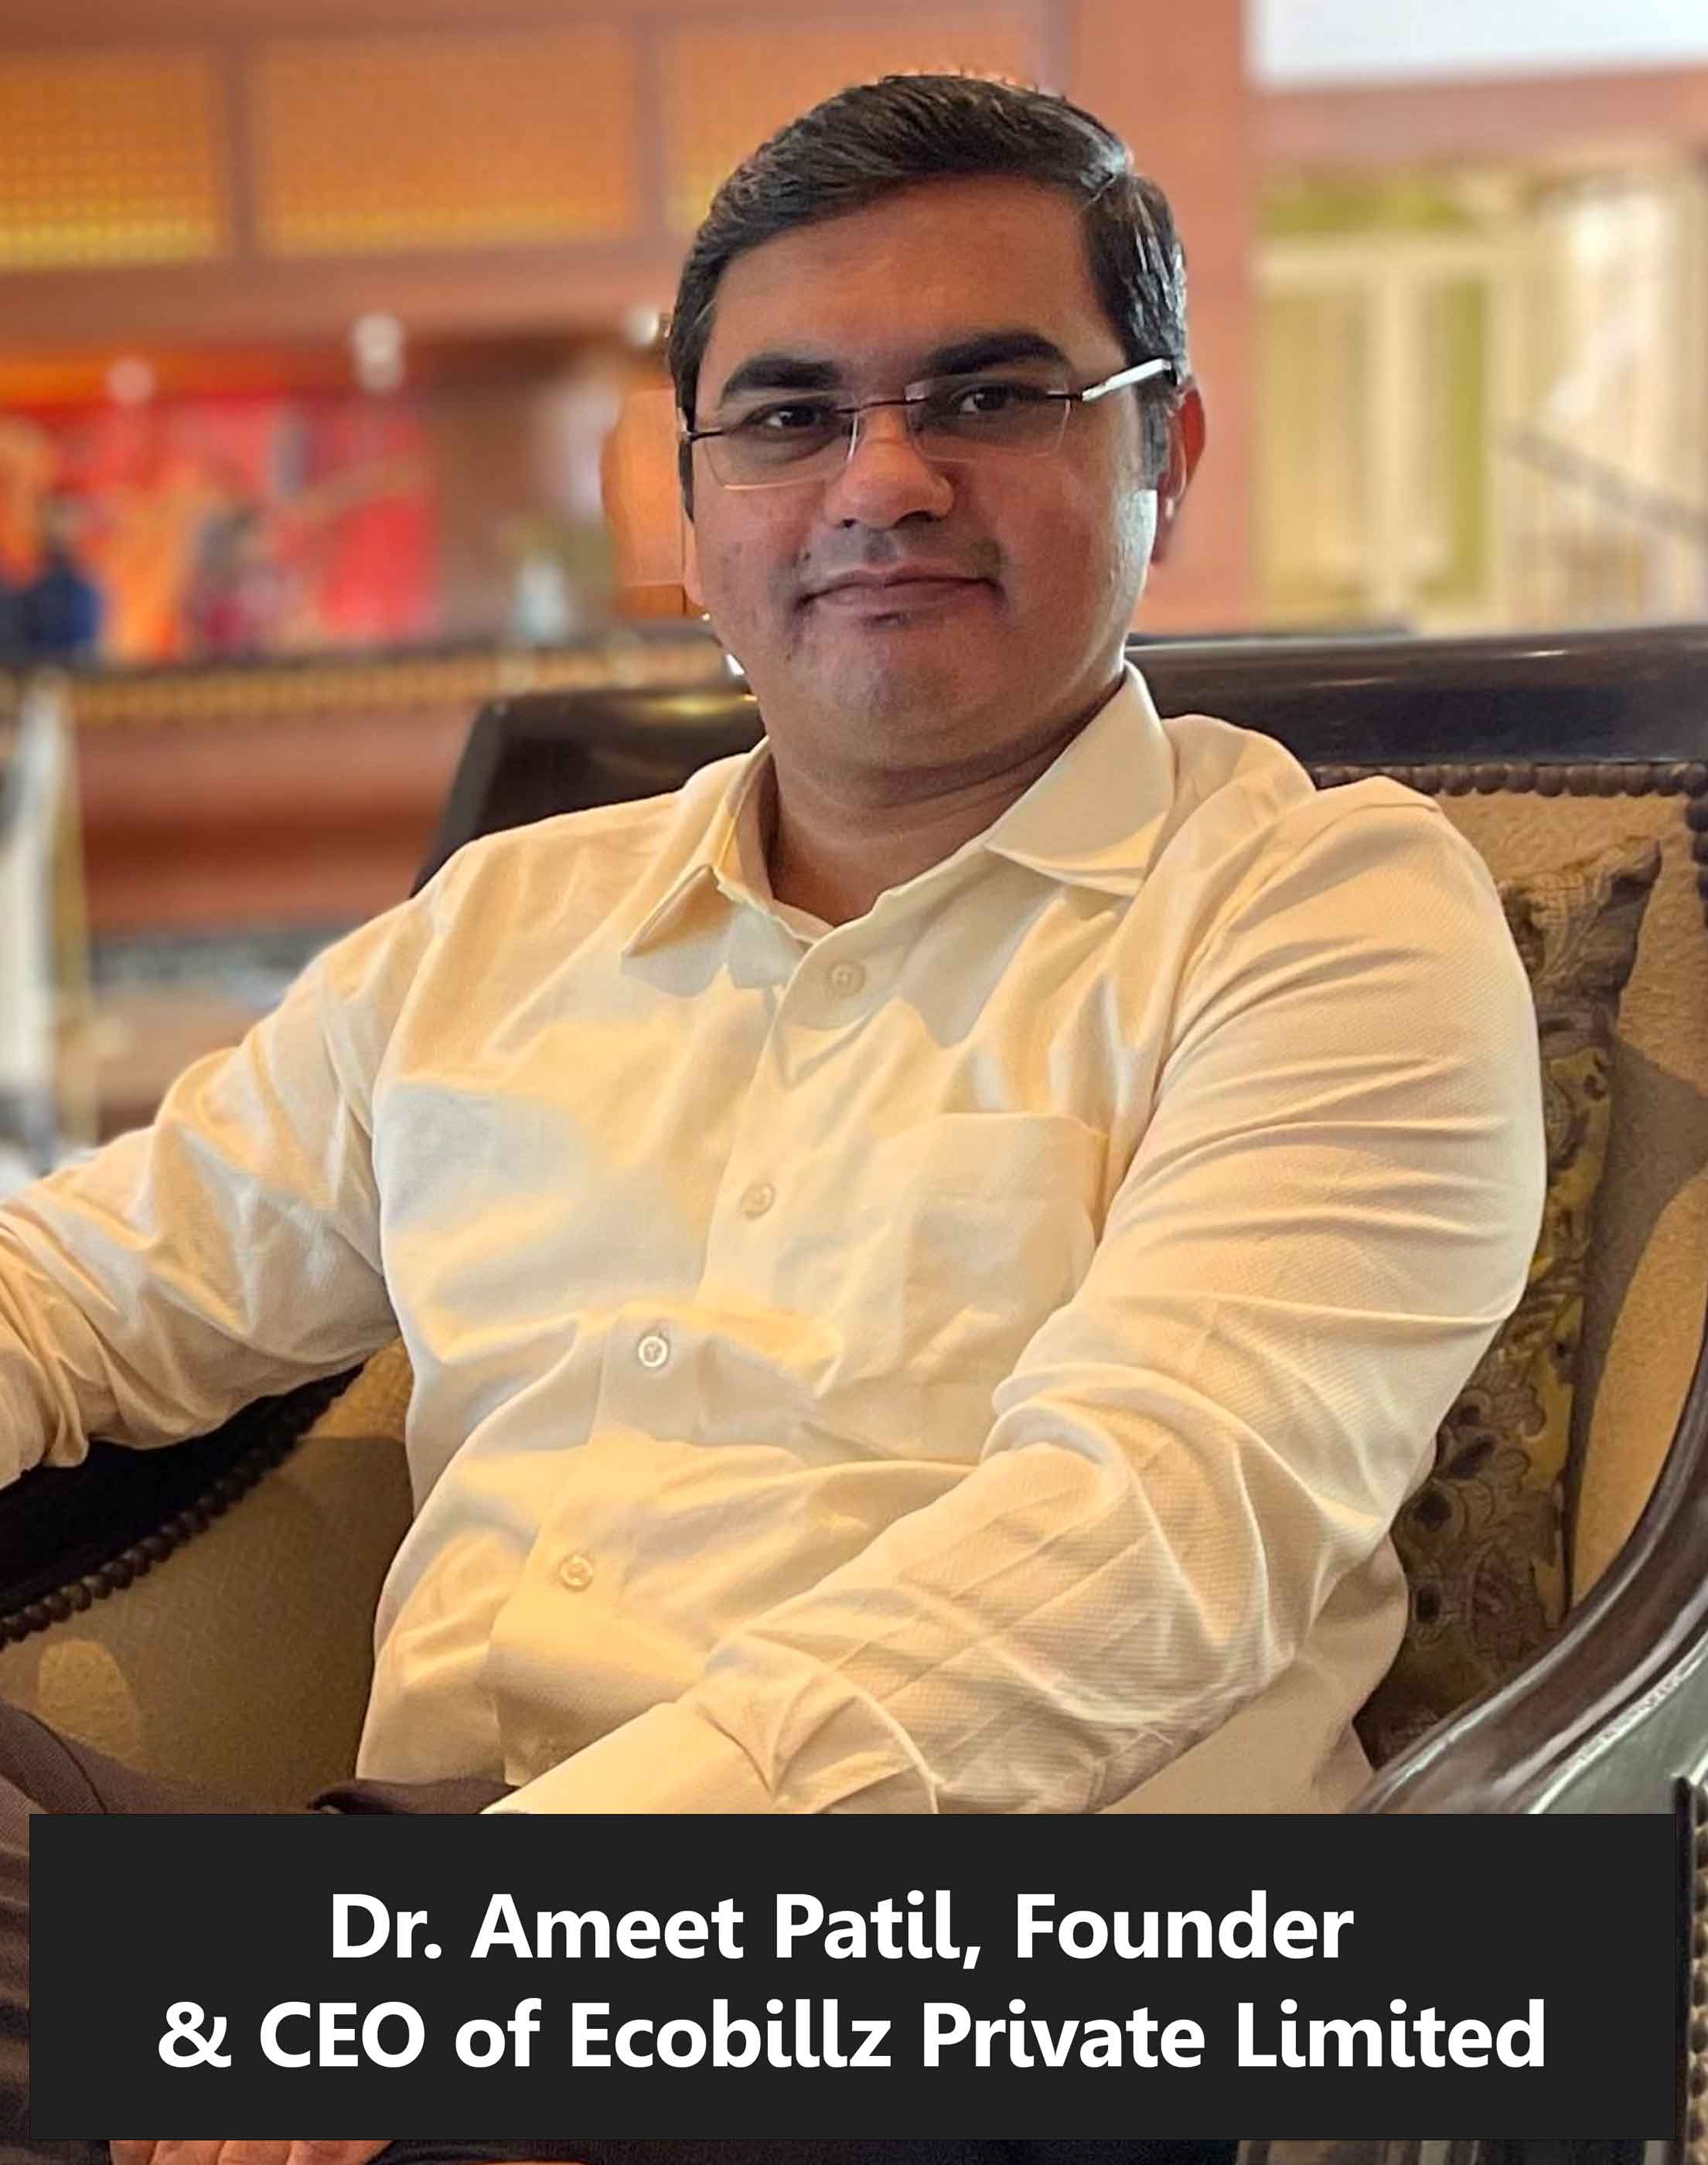 Dr.-Ameet-Patil,-Founder-&-CEO-of-Ecobillz-Private-Limited